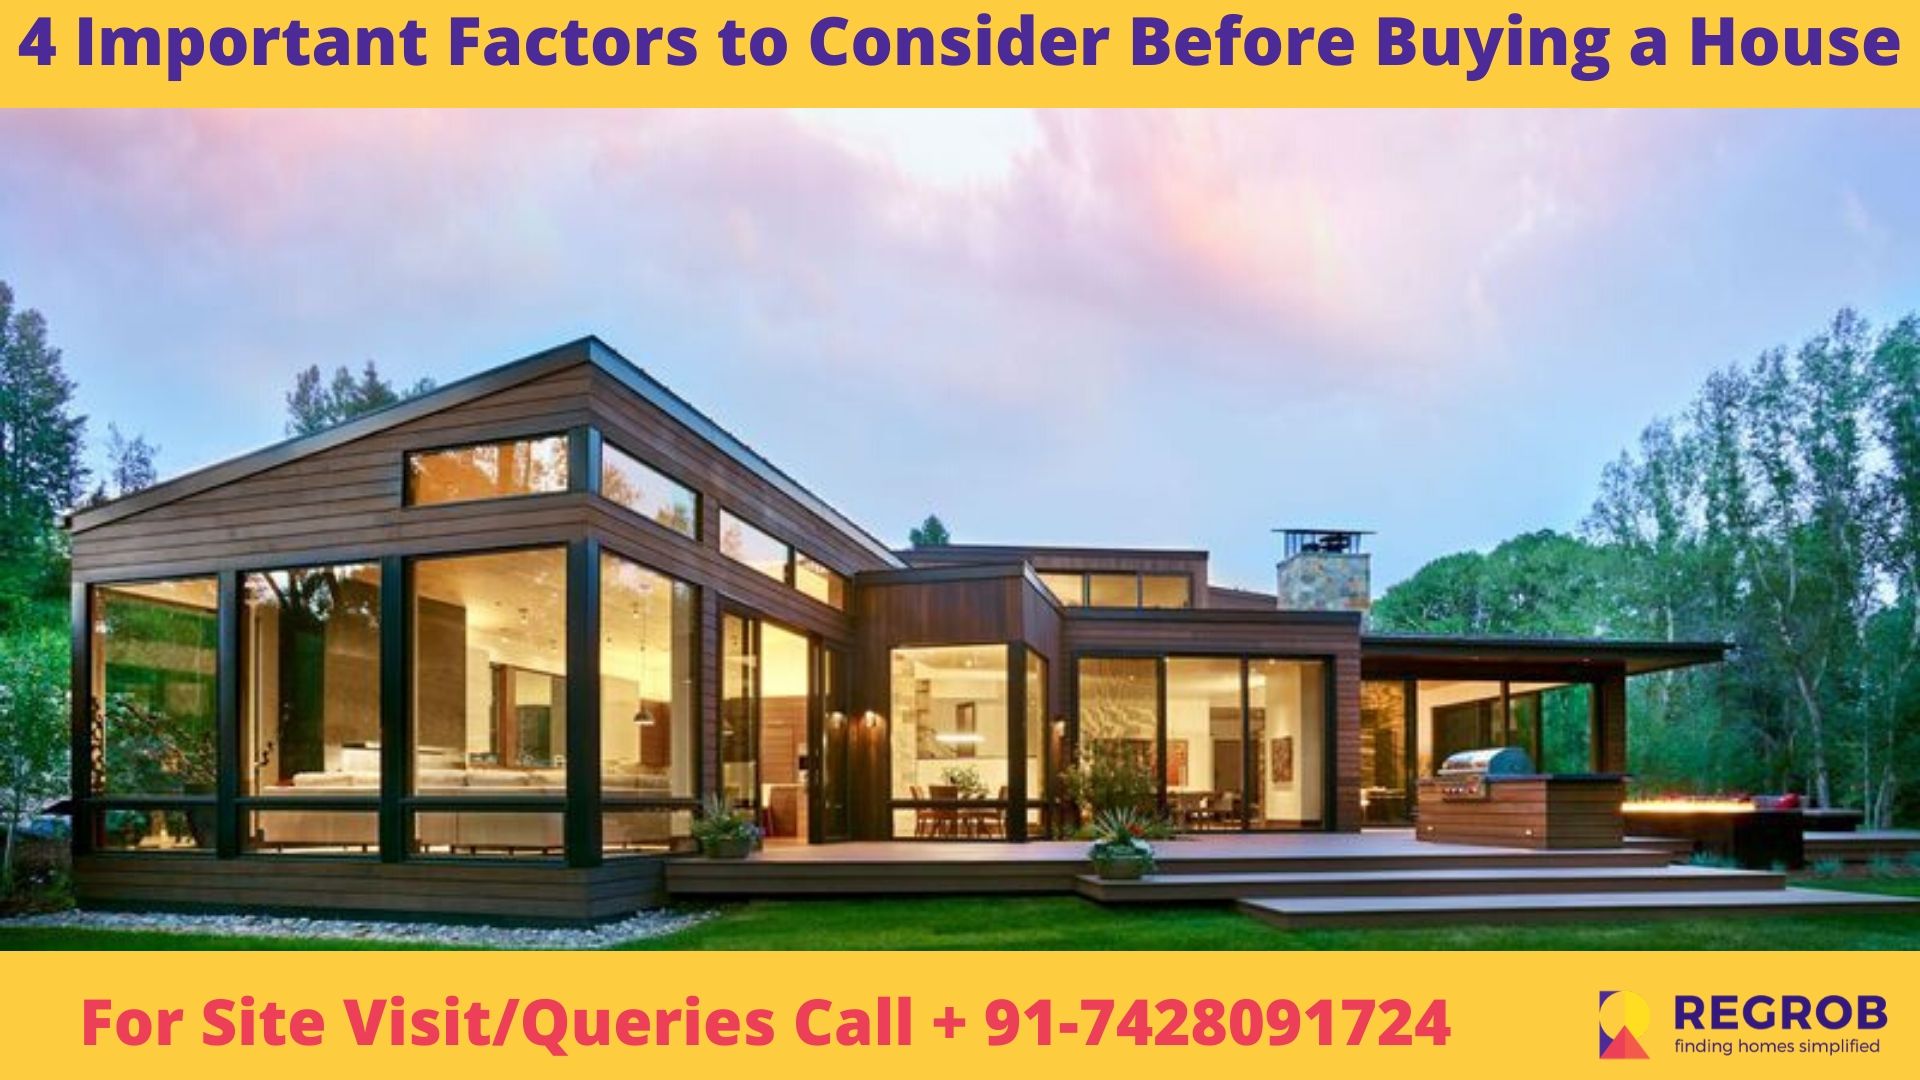 4 Important Factors One Should Consider Before Buying a House